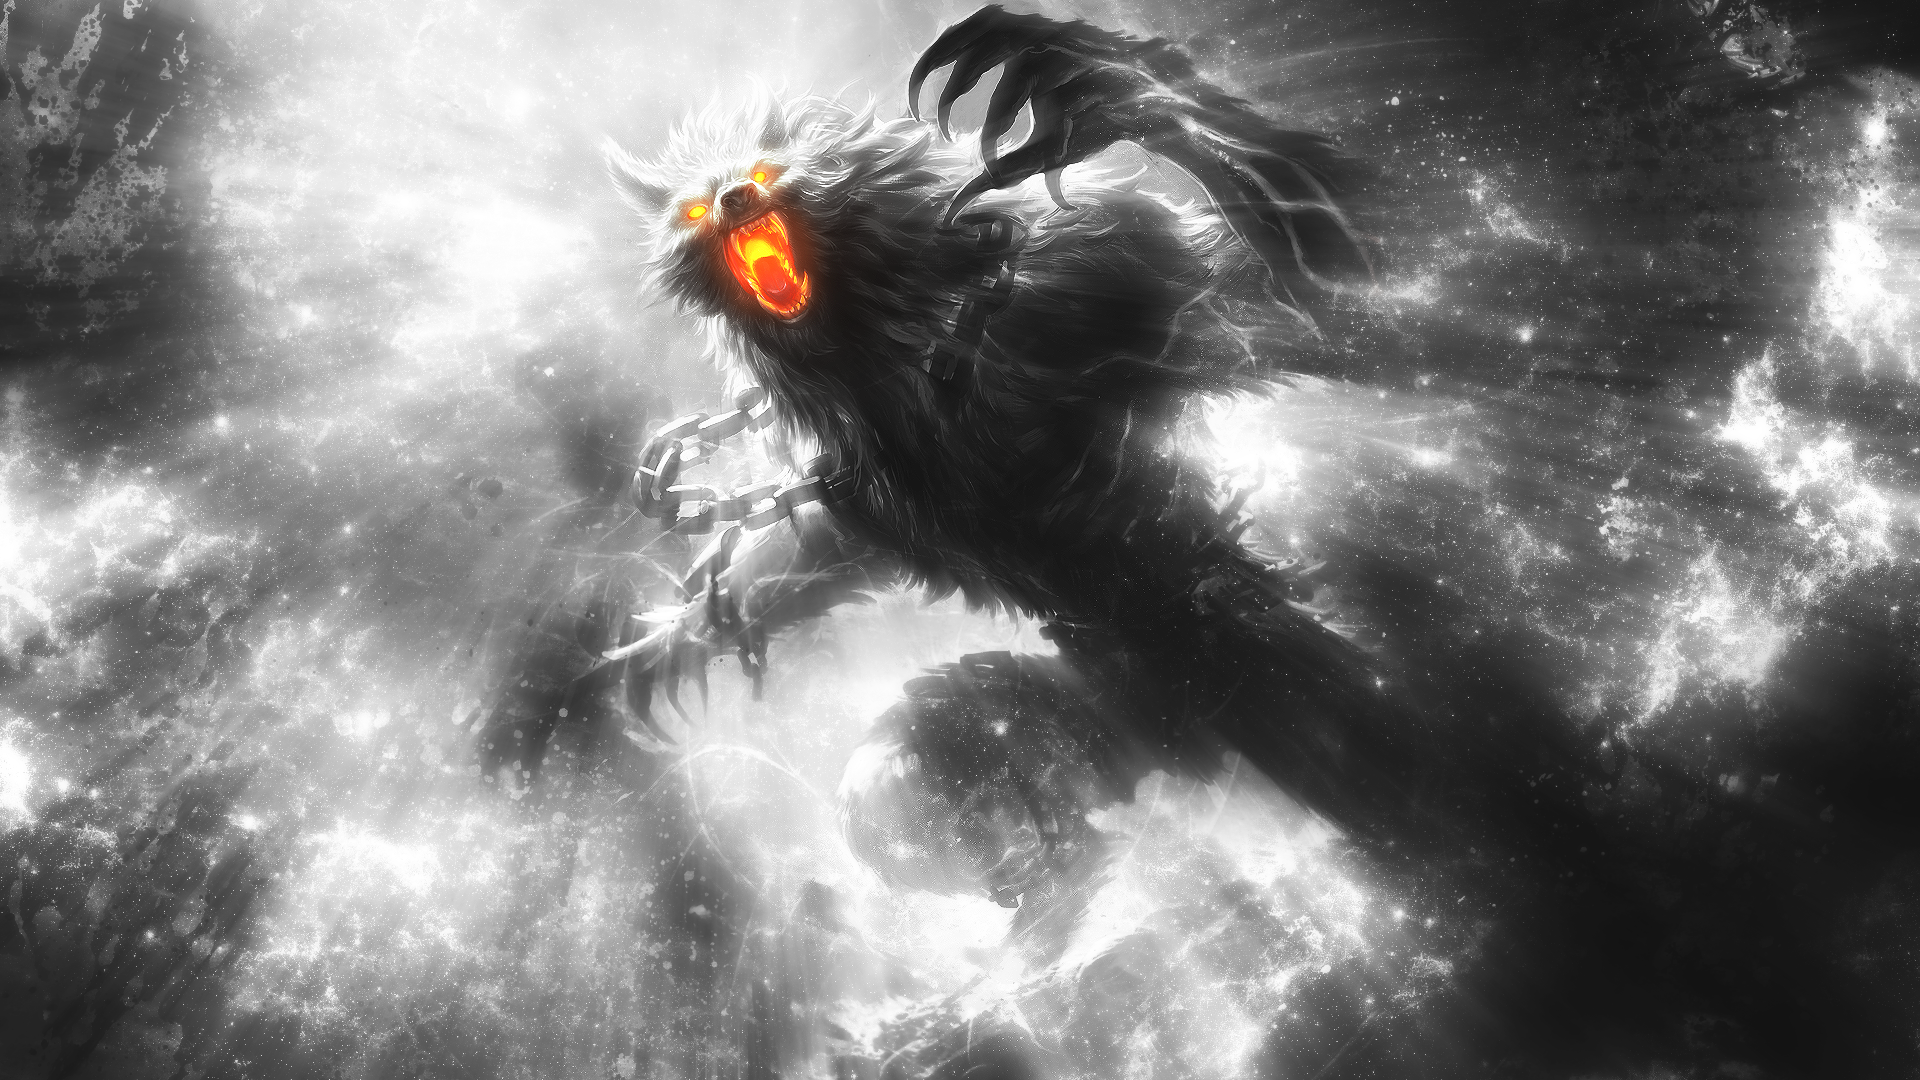 Fenrir Smite Creature Werewolf Fantasy Art Selective Coloring Glowing Eyes Chains 1920x1080